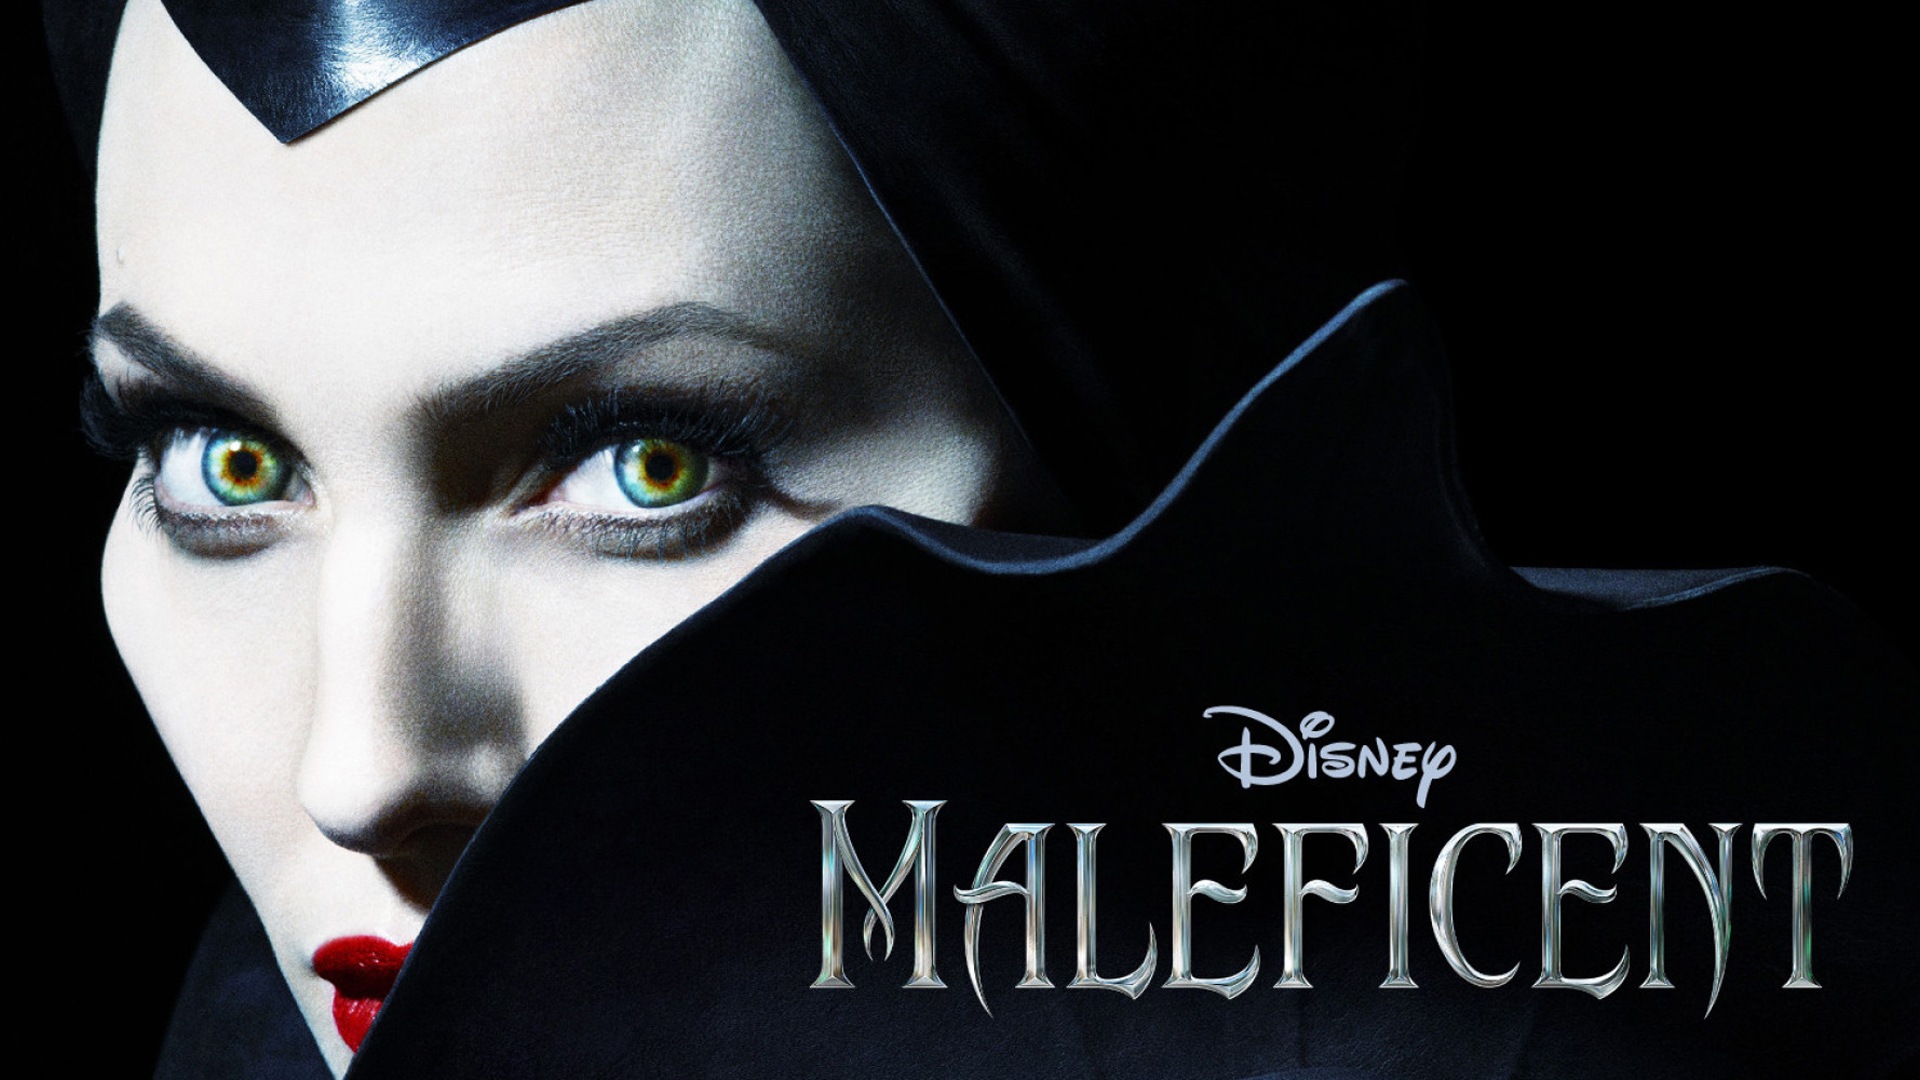 Maleficent 2014 HD movie wallpapers #14 - 1920x1080